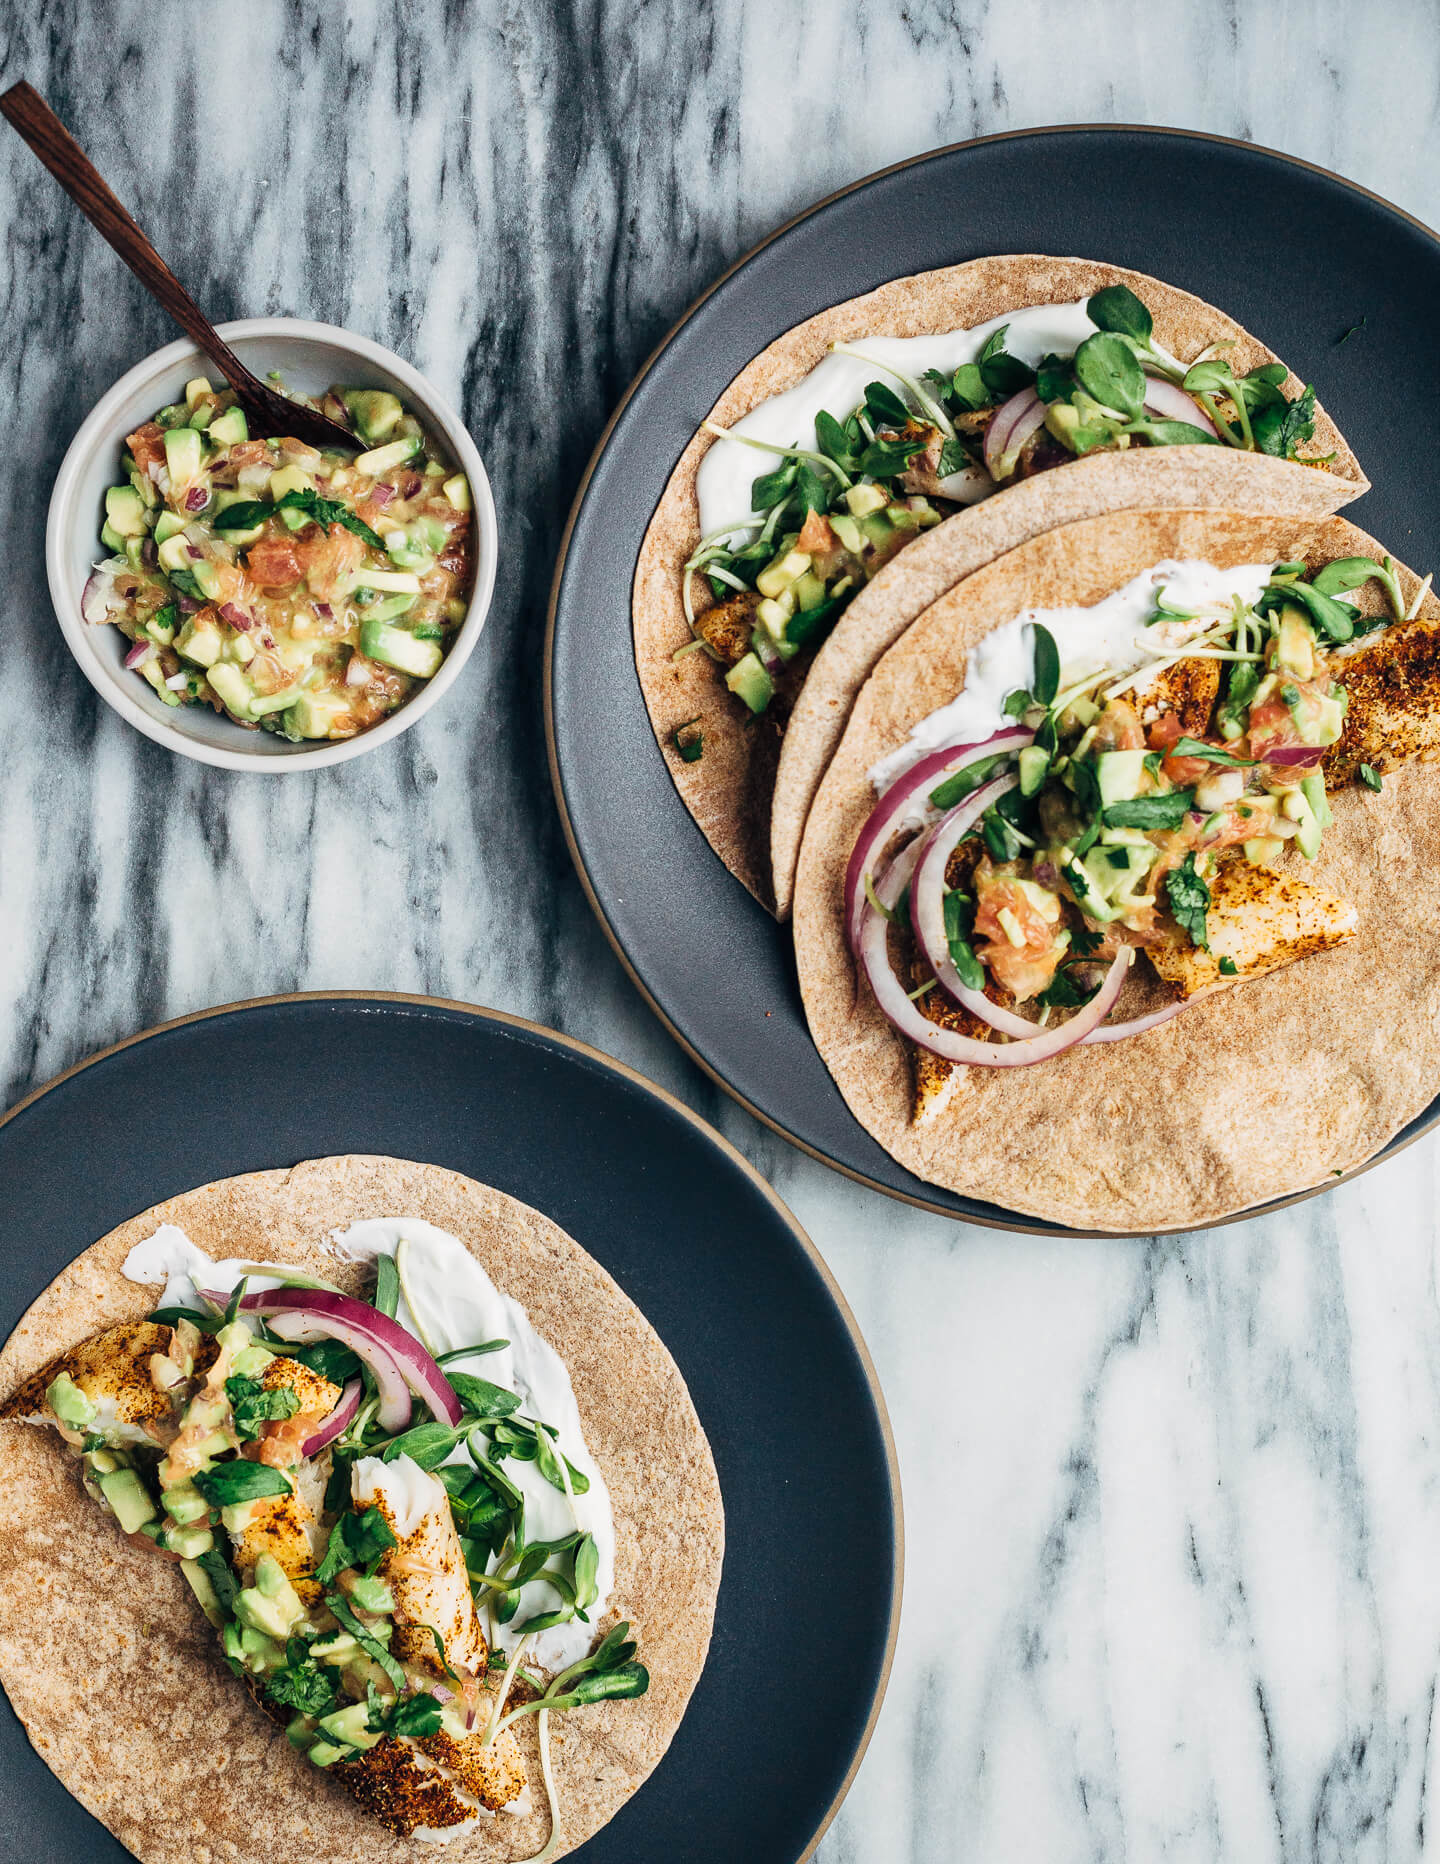 Simple broiled tilapia tacos that come together quickly under the broiler, making them perfect for weeknight meals. The tacos are topped with a tangly grapefruit-avocado salsa that contrasts beautifully with the spicy fish. 